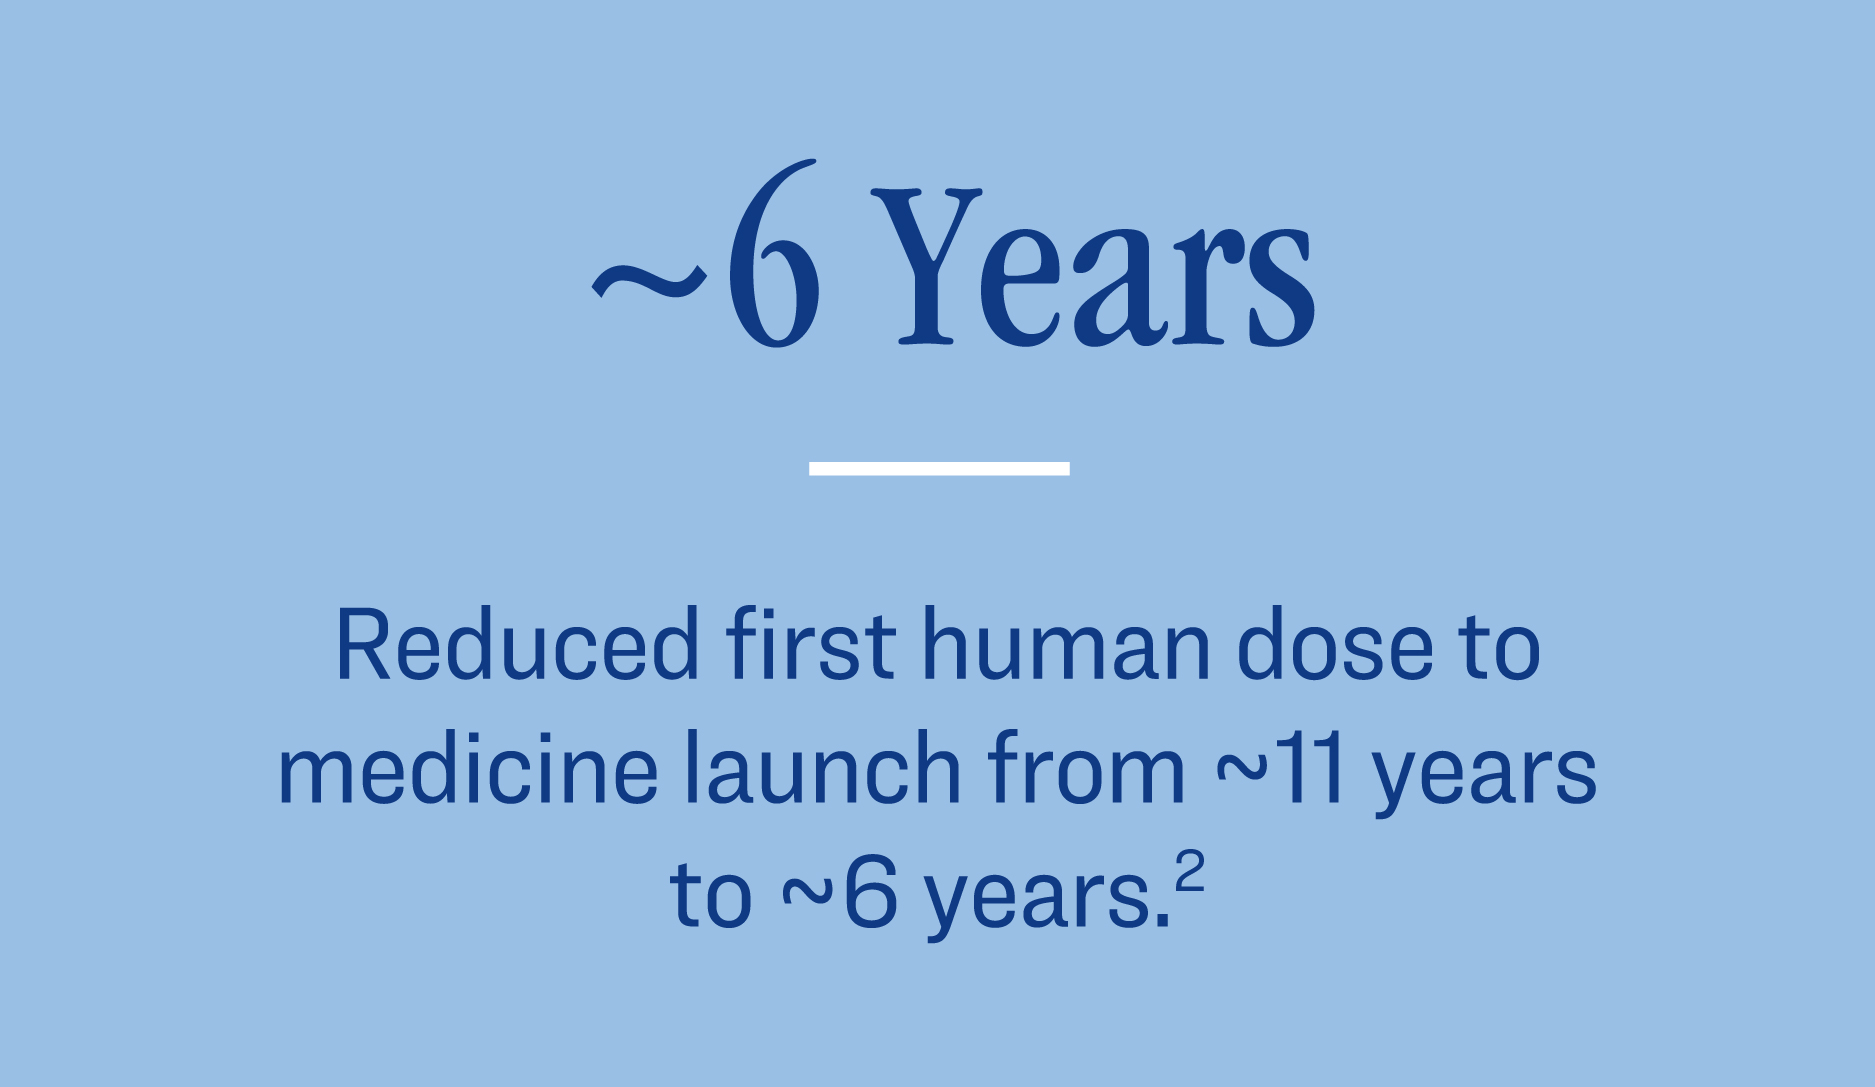 Approximately 6 years - Reduced first human dose to medicine launch from approximately 11 years (industry average) to approximately 6 years. 